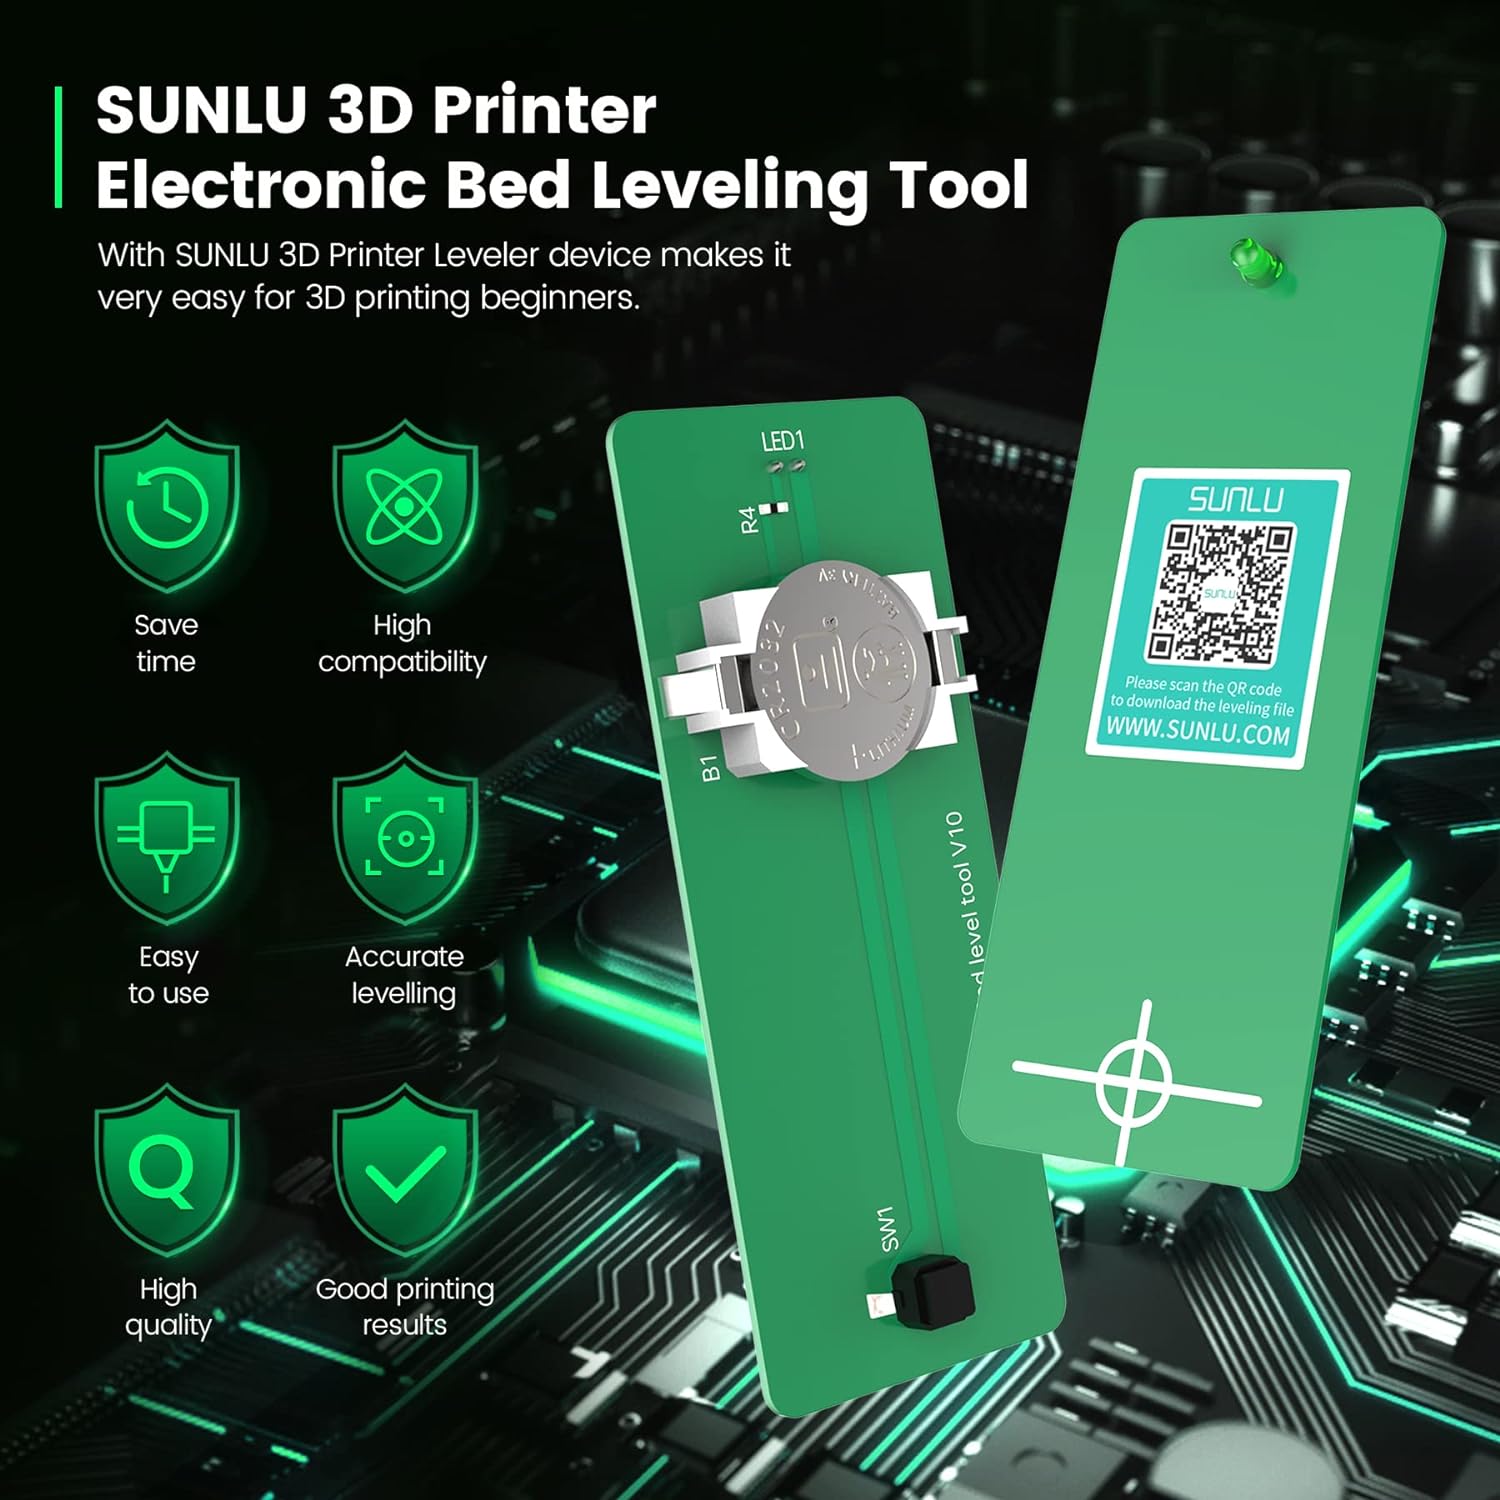 2 Packs SUNLU 3D Printer Leveler, 3D Printer Electronic Bed Leveling Tool, 3D Printer Accessories, Auto Bed Leveling Sensor Kit for Most FDM 3D Printers, Easy to Use, Equipped Four Batteries, Green